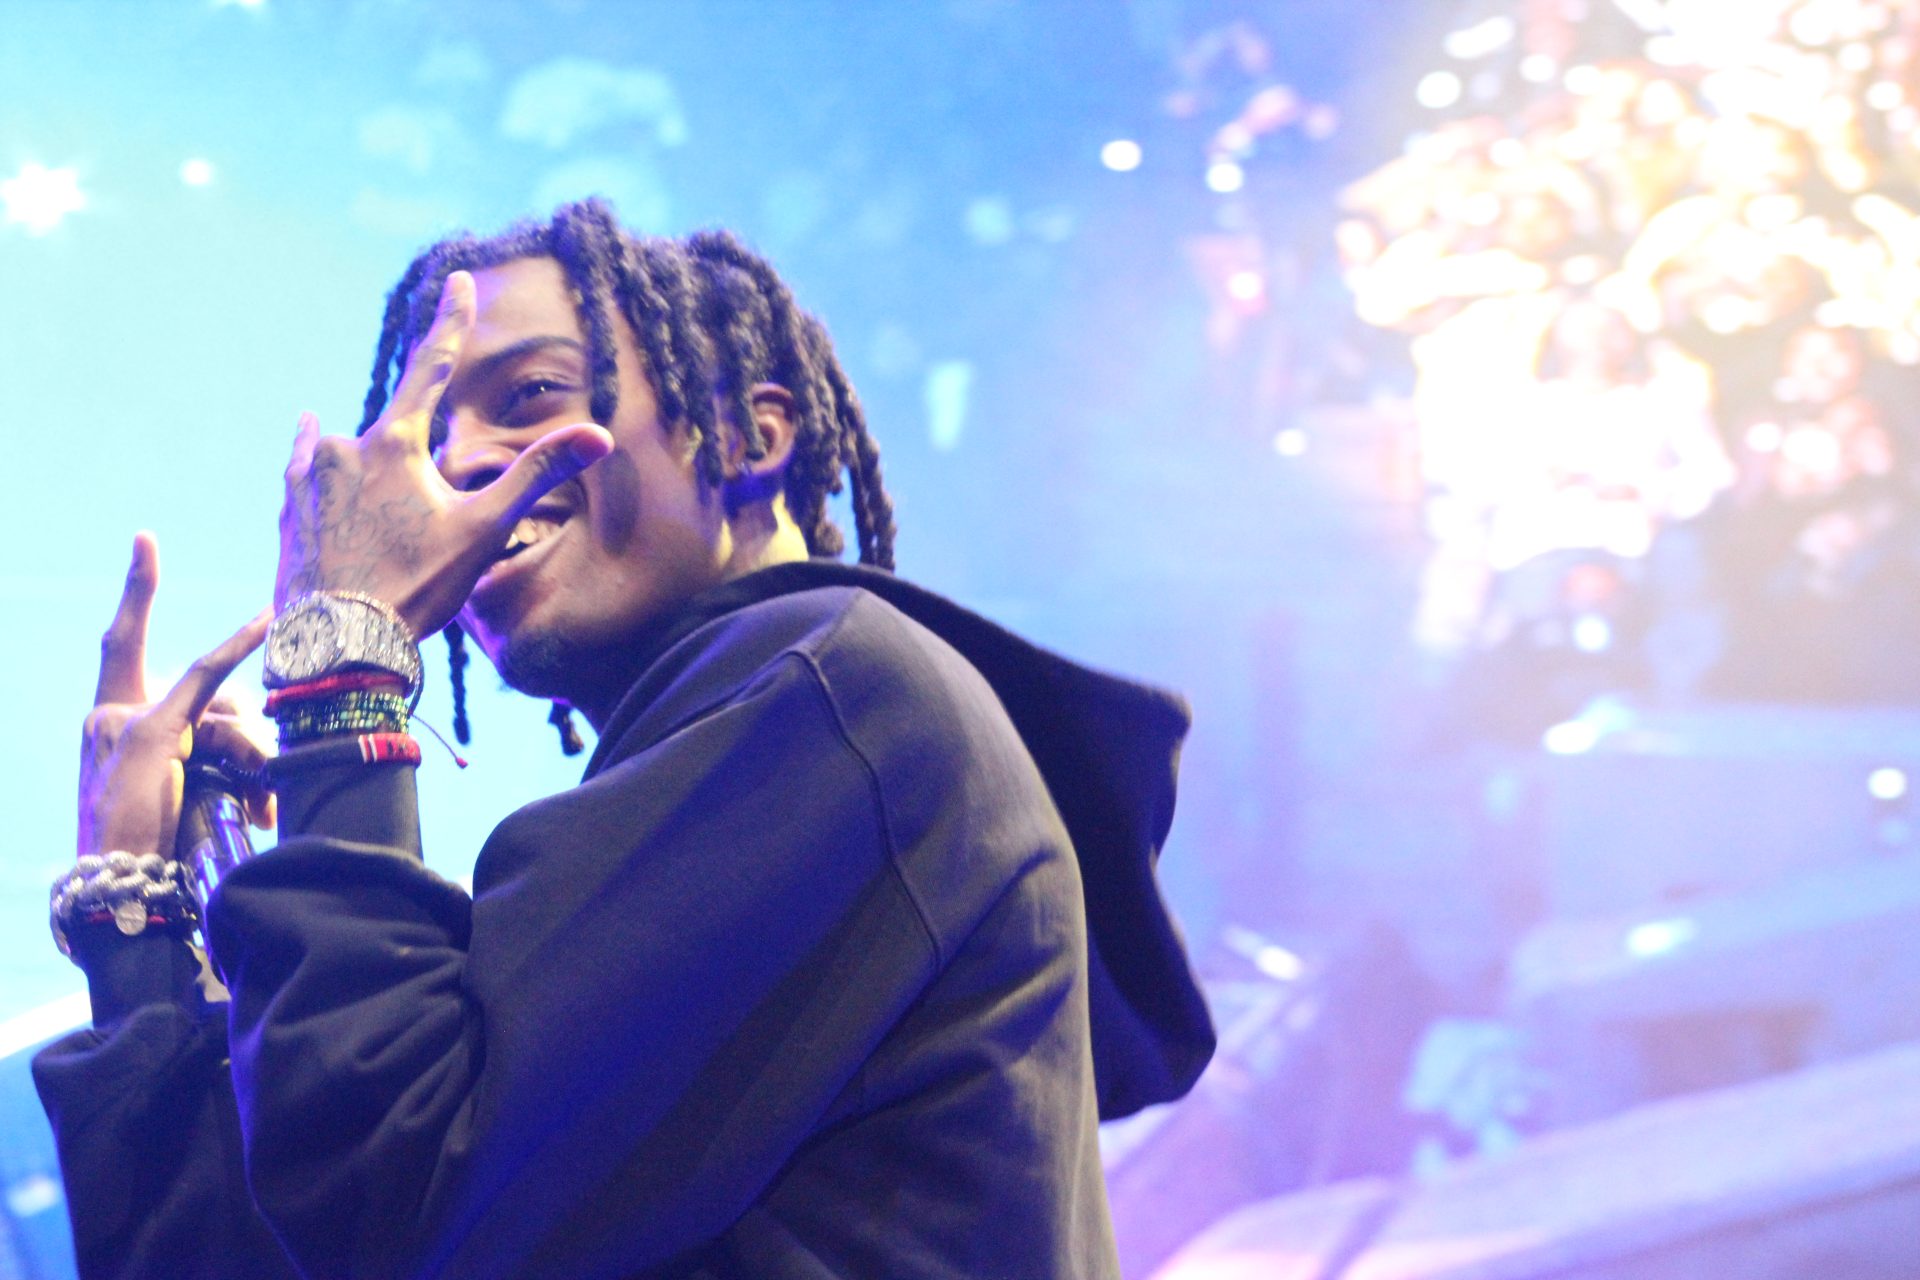 Playboi Carti arrested for alleged aggravated assault; Iggy Azalea comments